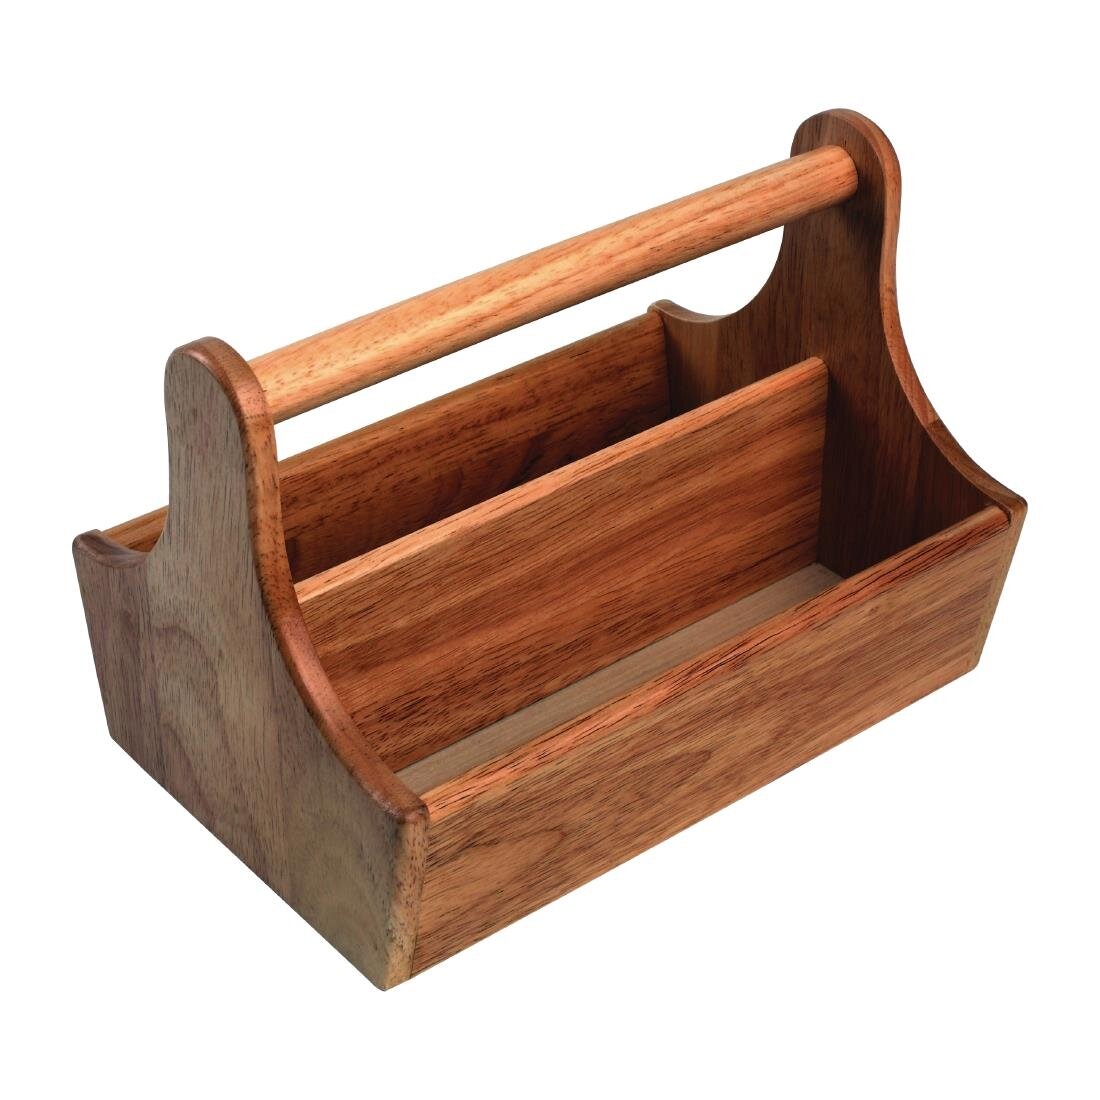 Acacia Wood Condiment Basket with Handle - [DL148]